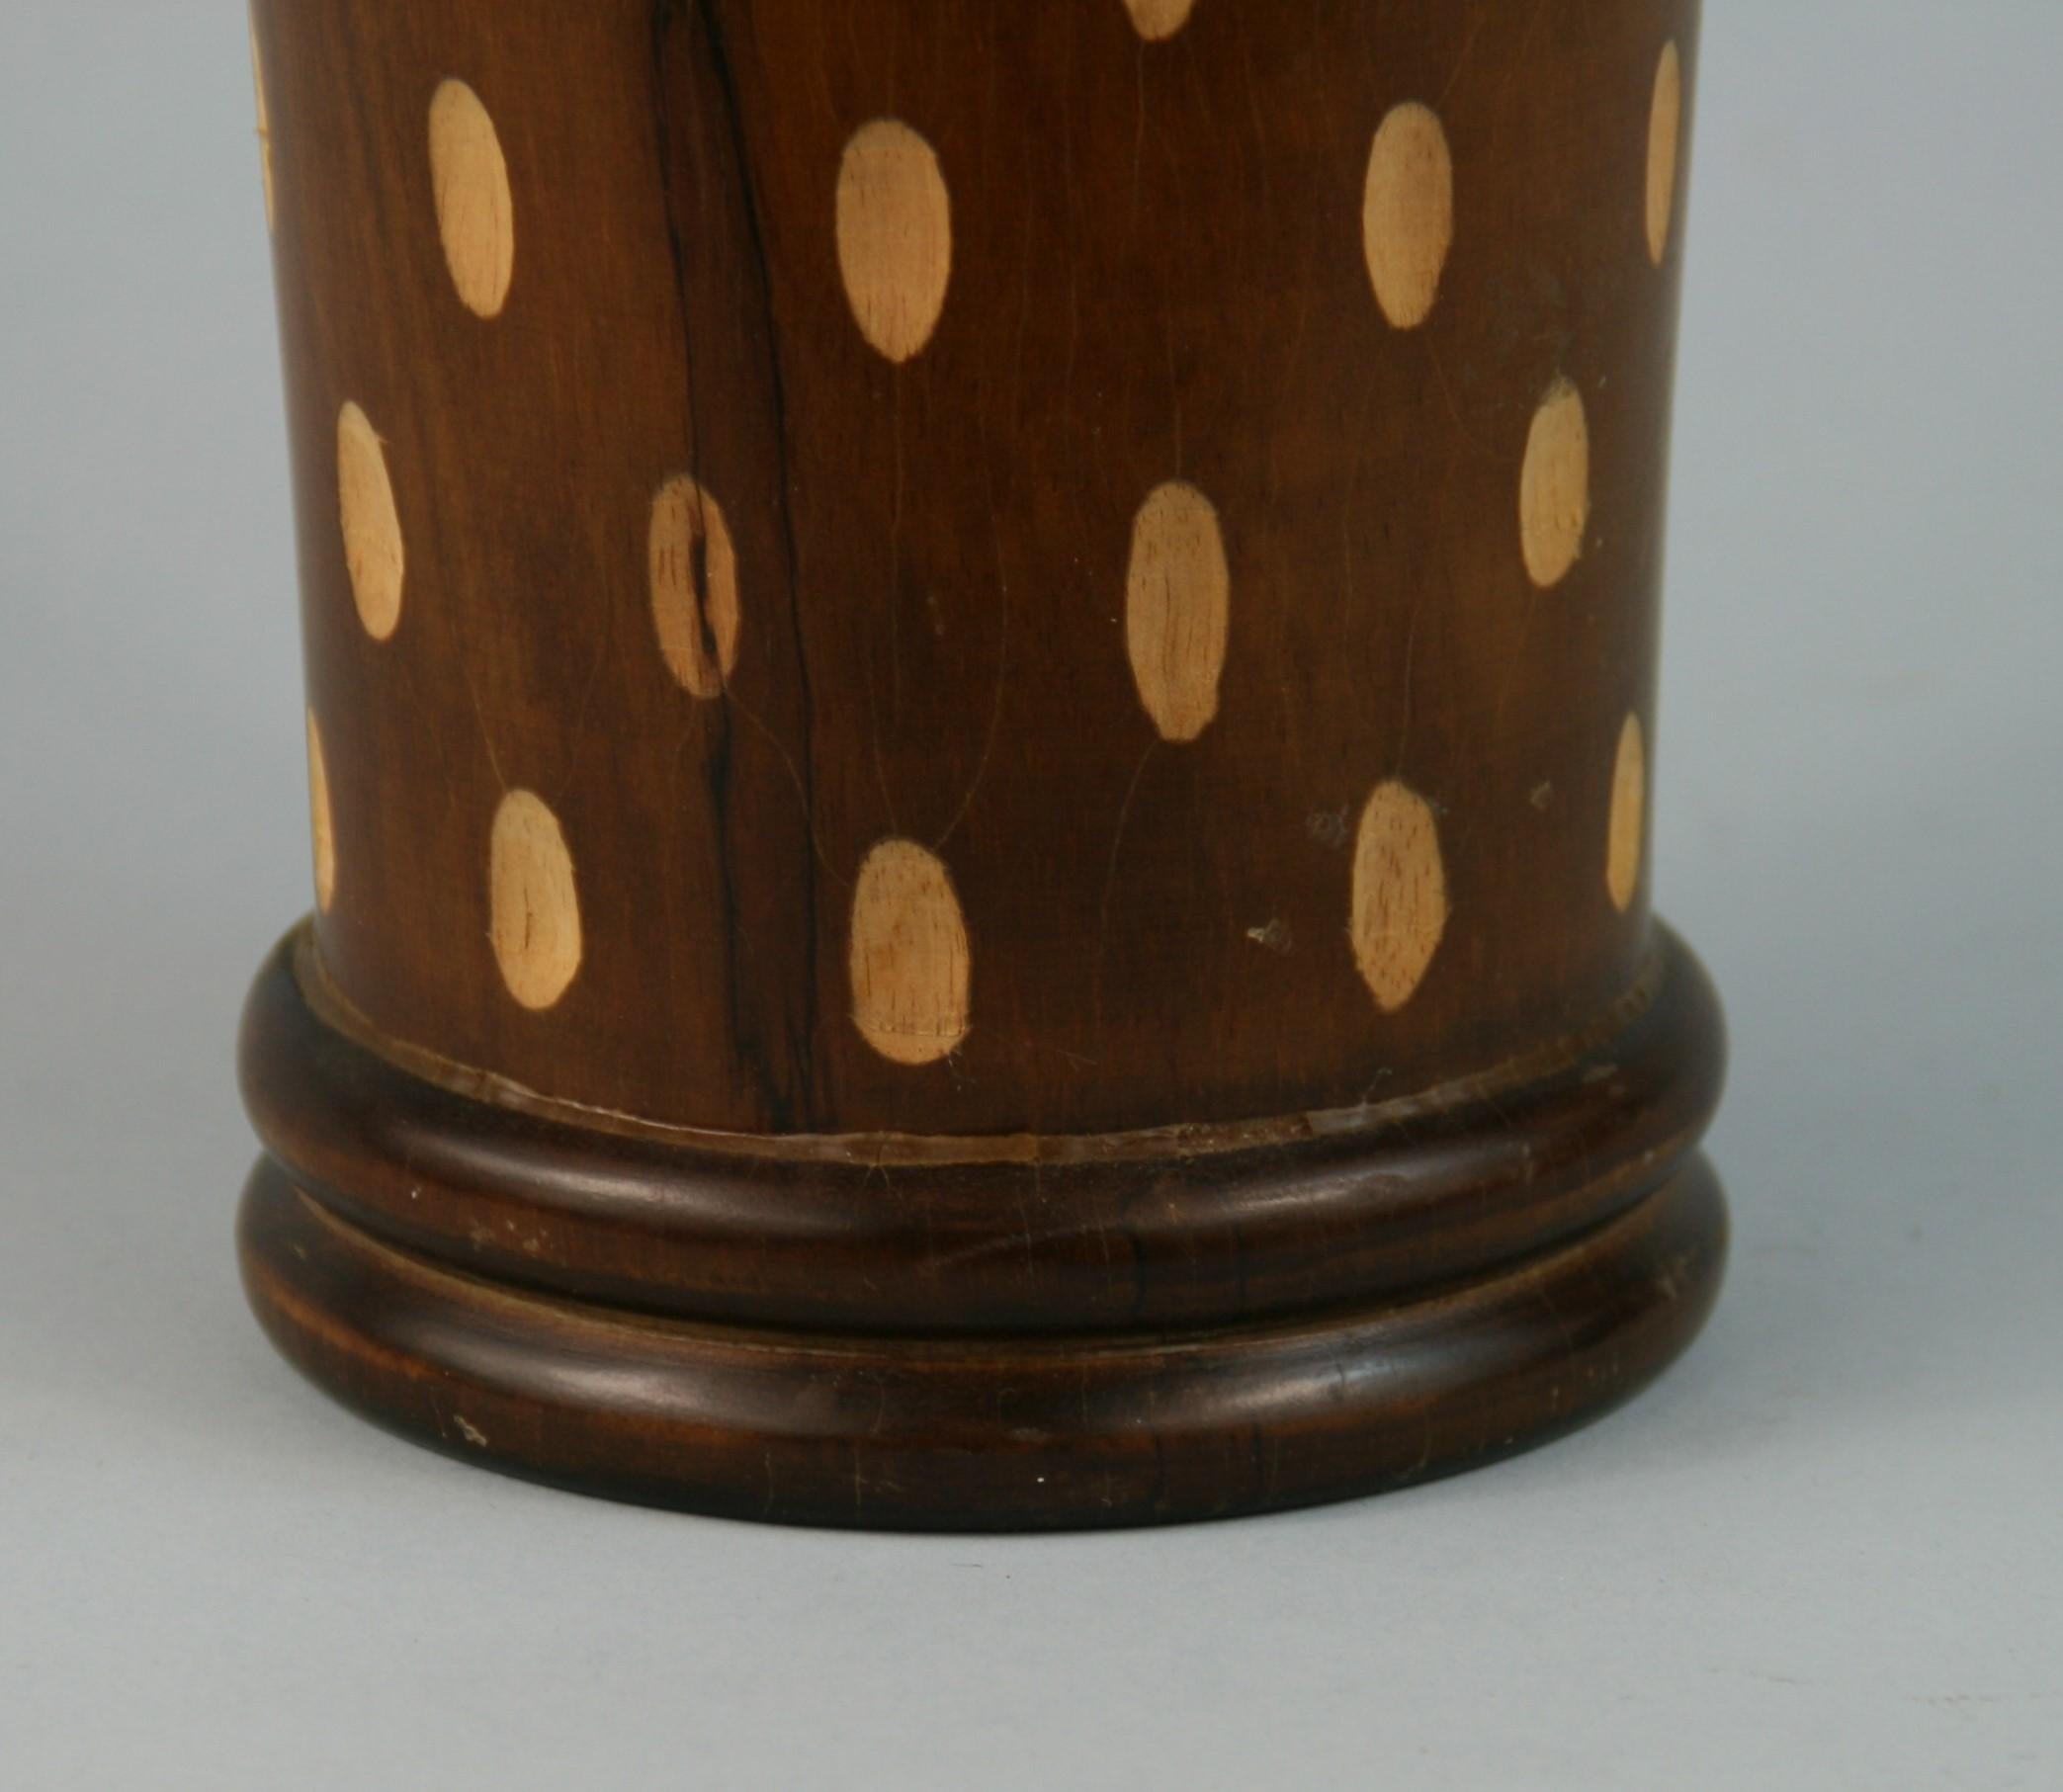 Japanese Art Deco Style Wood Hand Turned Vase with Incised Oval Cutouts In Good Condition For Sale In Douglas Manor, NY